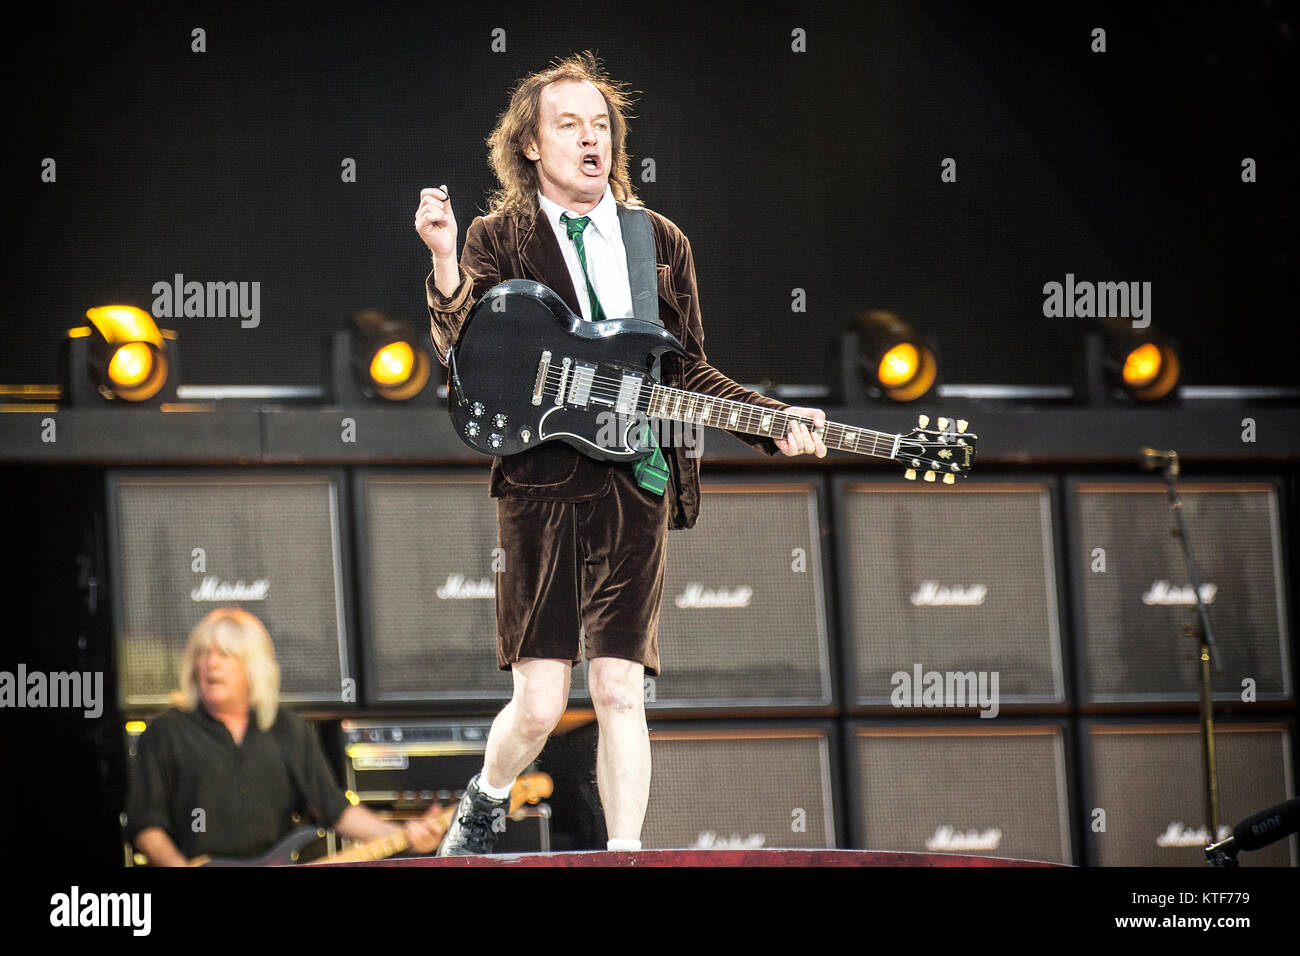 The Australian rock band AC/DC performs a live concert at Valle Hovin Stadion in Oslo as part of the Rock or Bust World 2015 Tour. Here musician and guitarist Angus Young is seen live on stage. Norway, 17/07 2015. Stock Photo